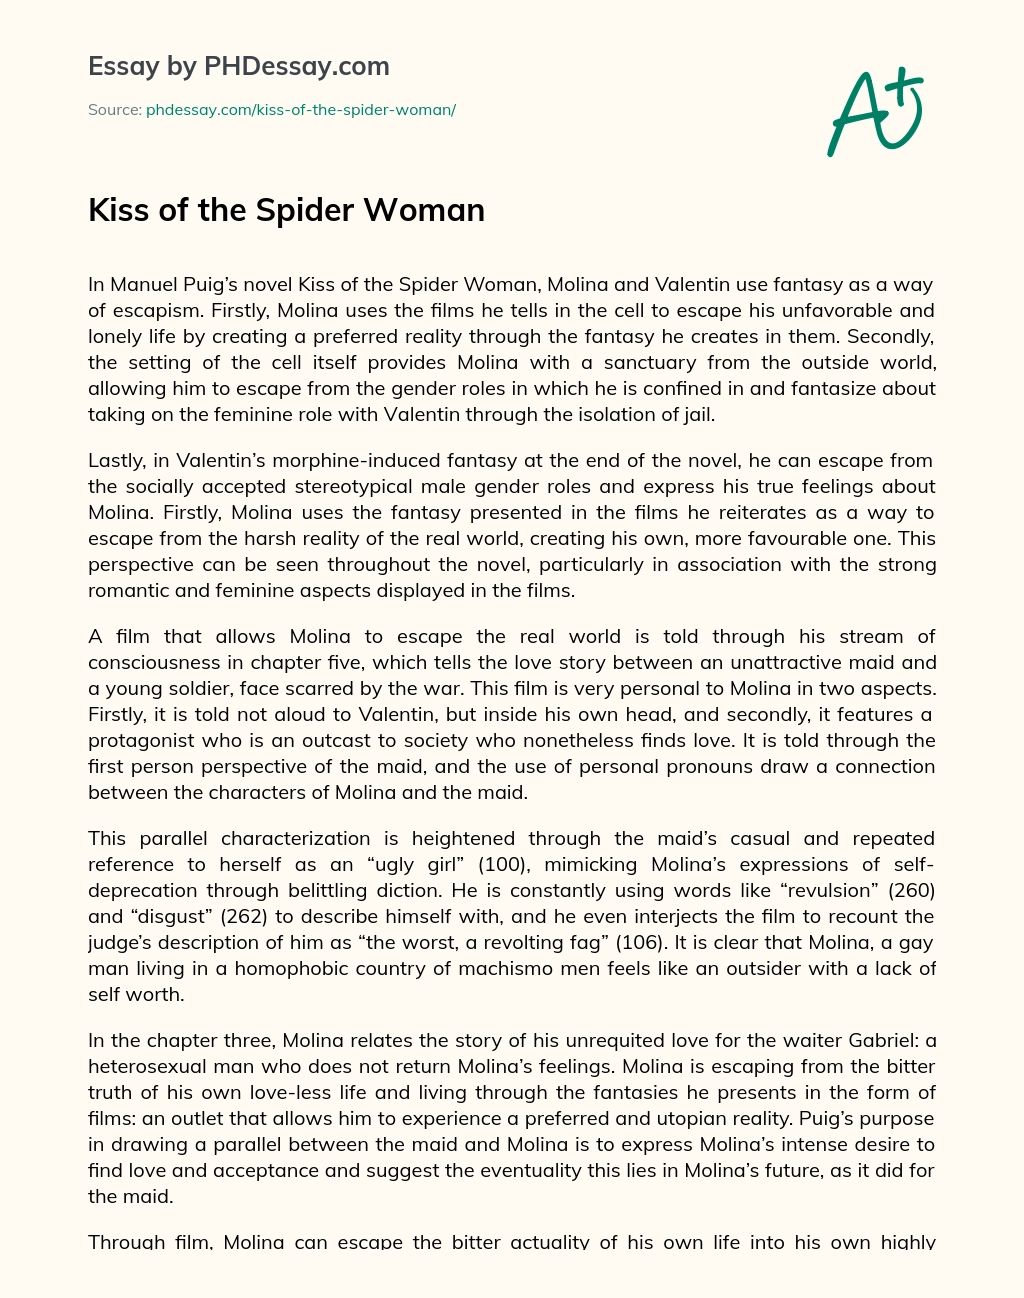 Kiss of the Spider Woman essay